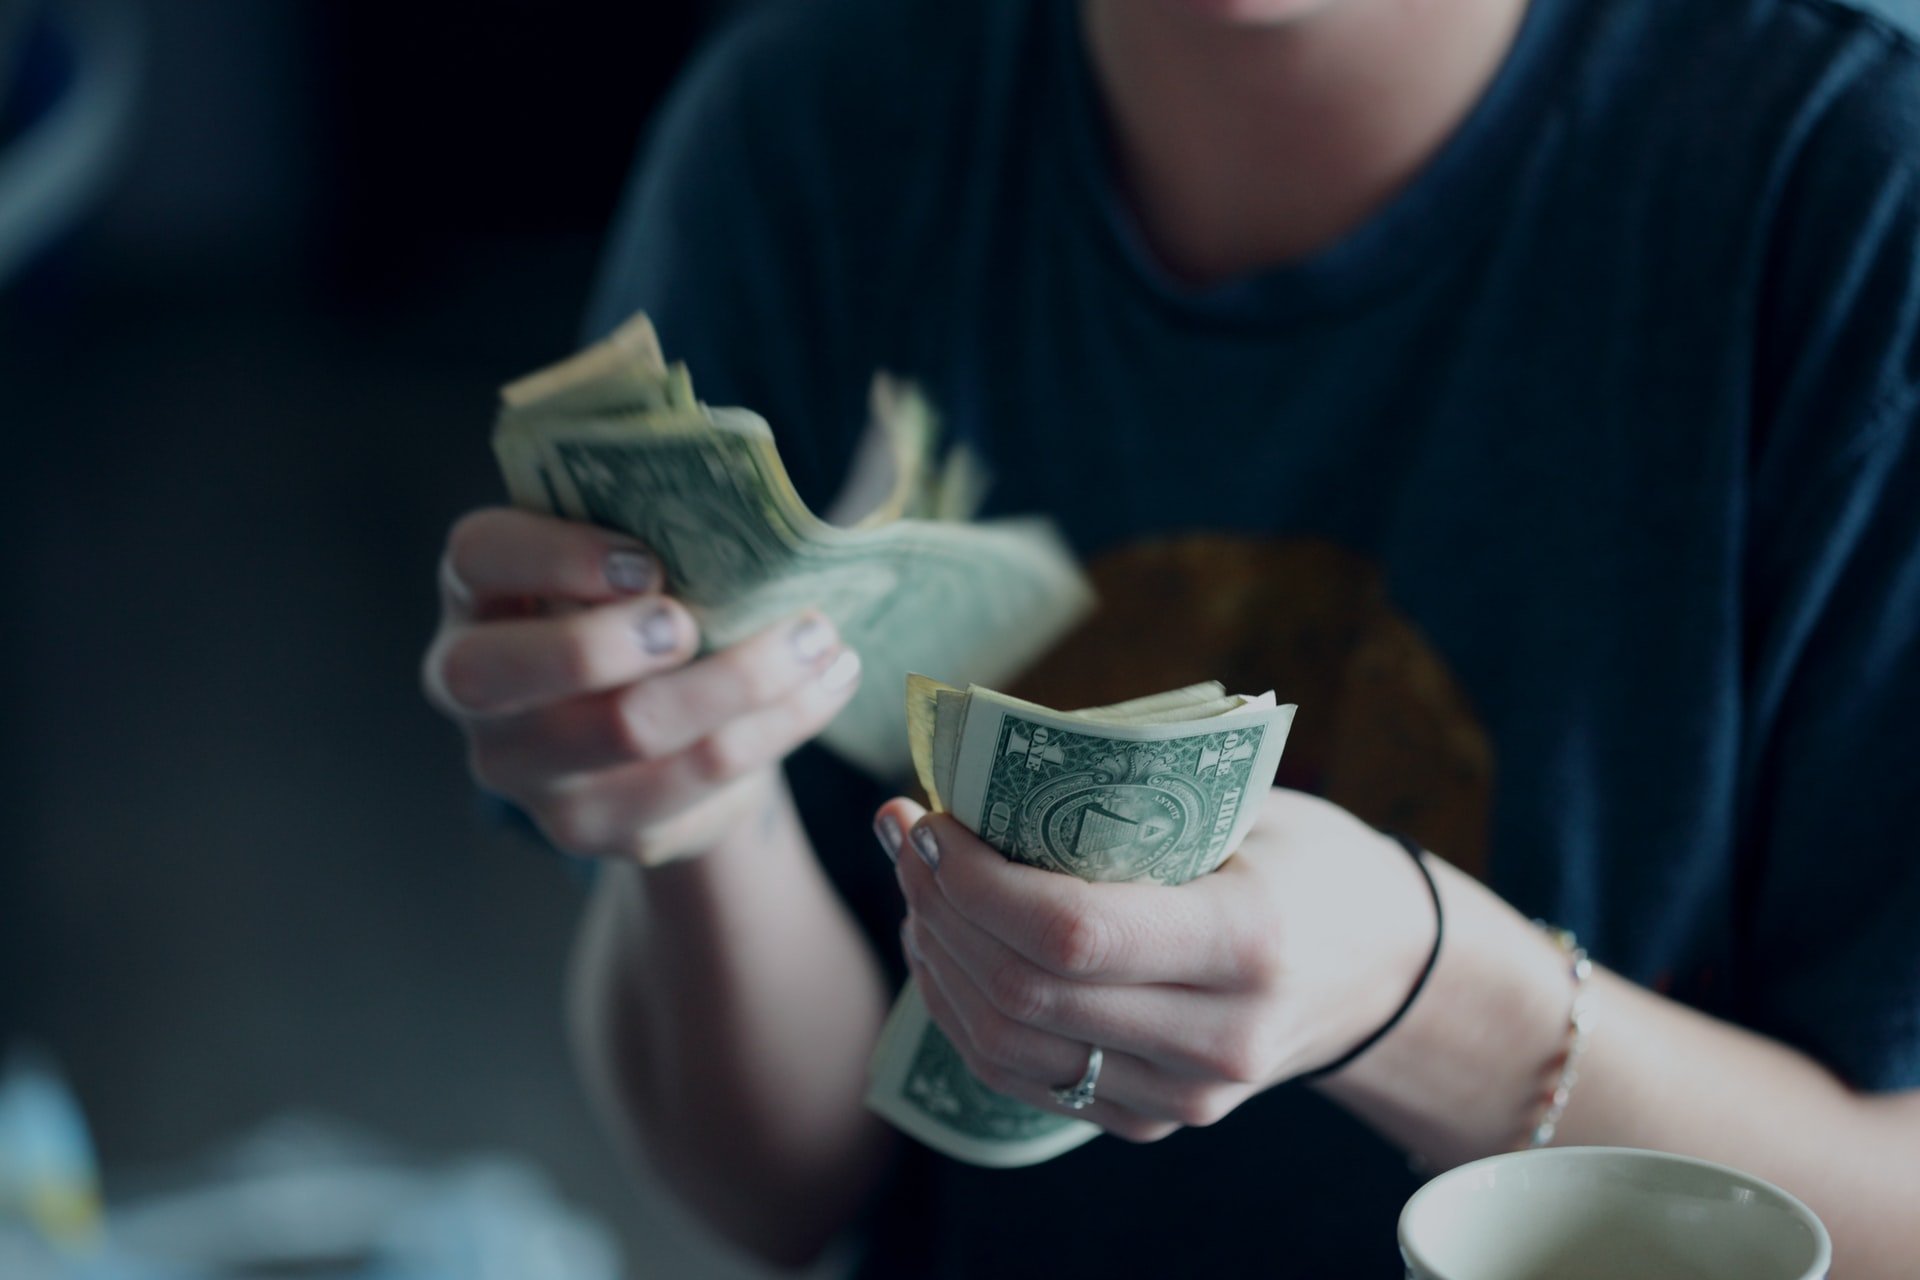 She counted the money before keeping it in her room | Source: Unsplash